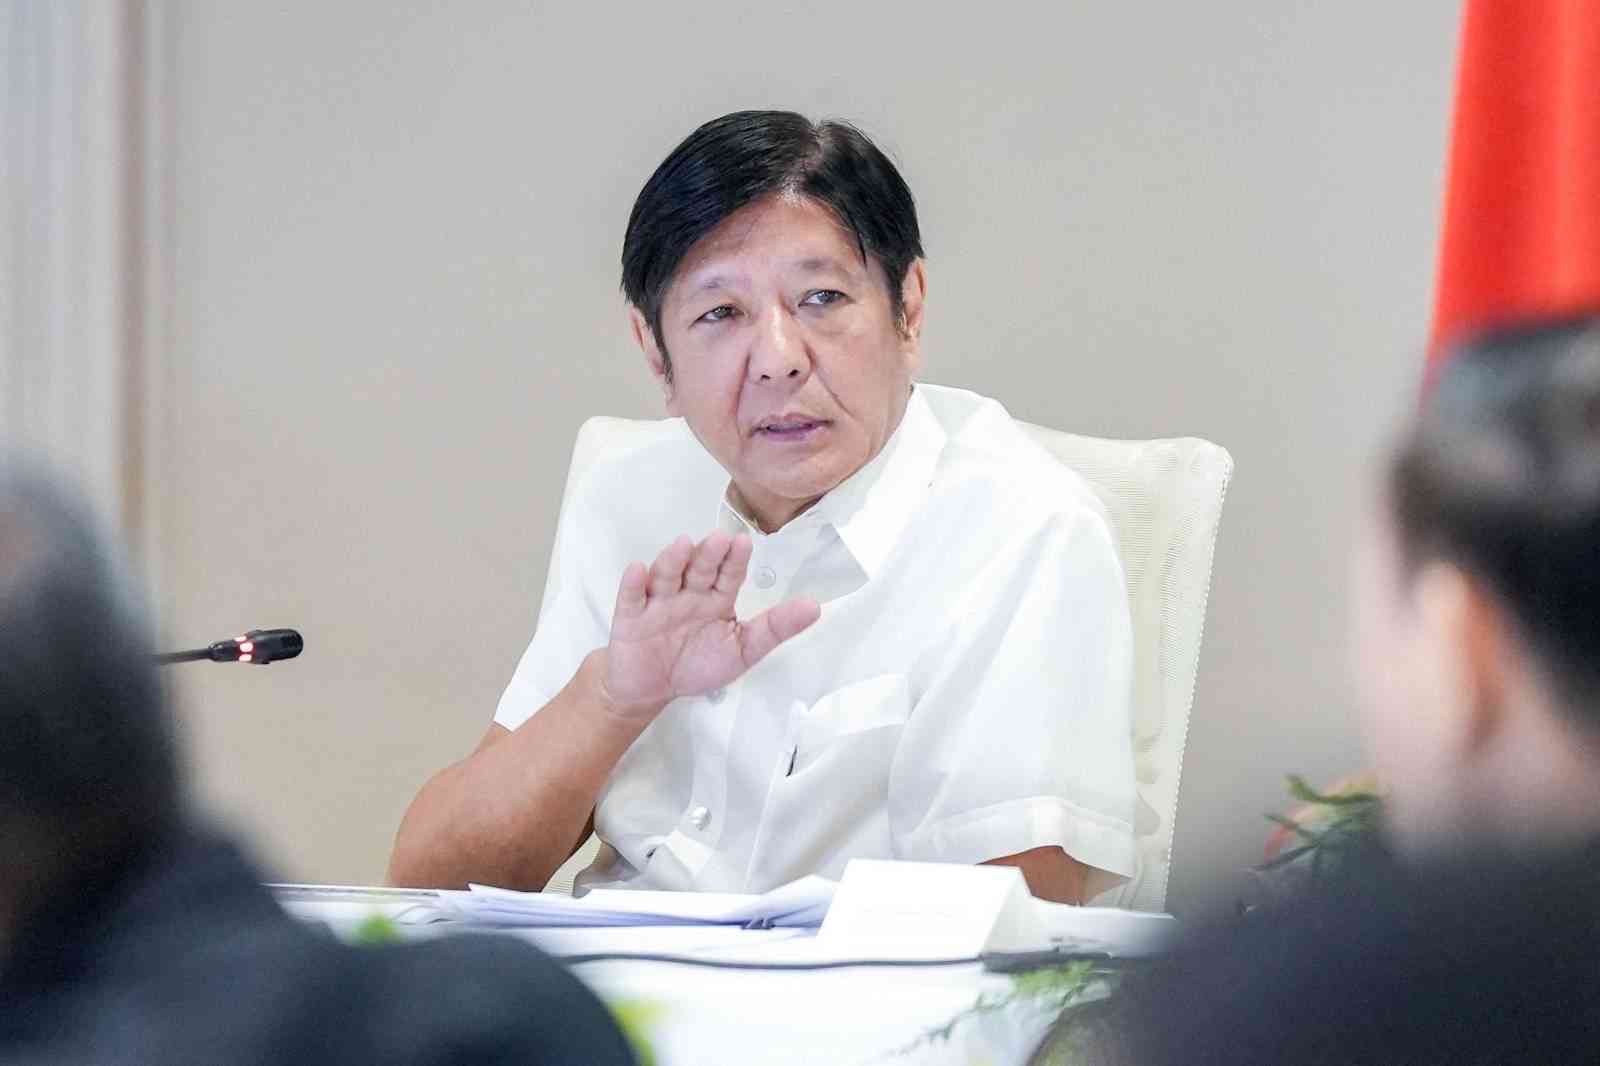 Marcos refuses to equip PH vessels with water cannons: “We have no intention of attacking anyone“